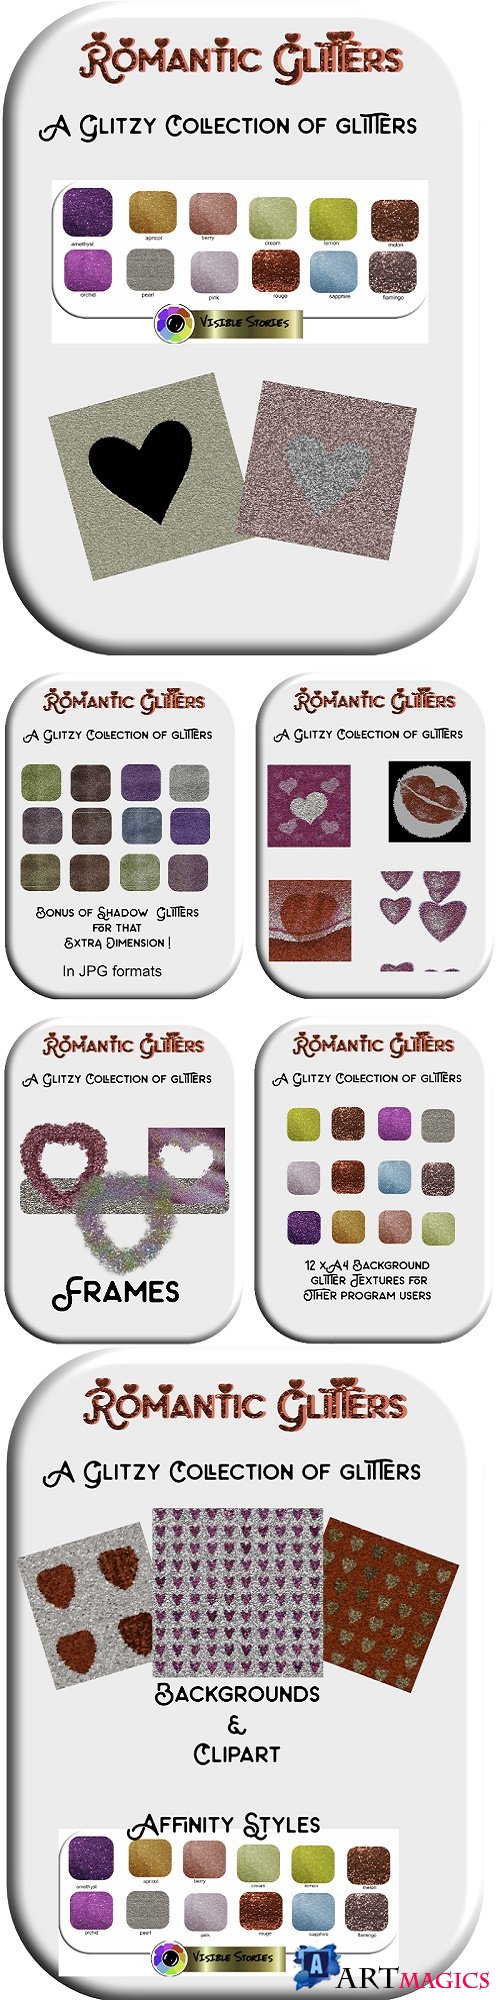 Romantic Glitters - Affinity Styles, Textures